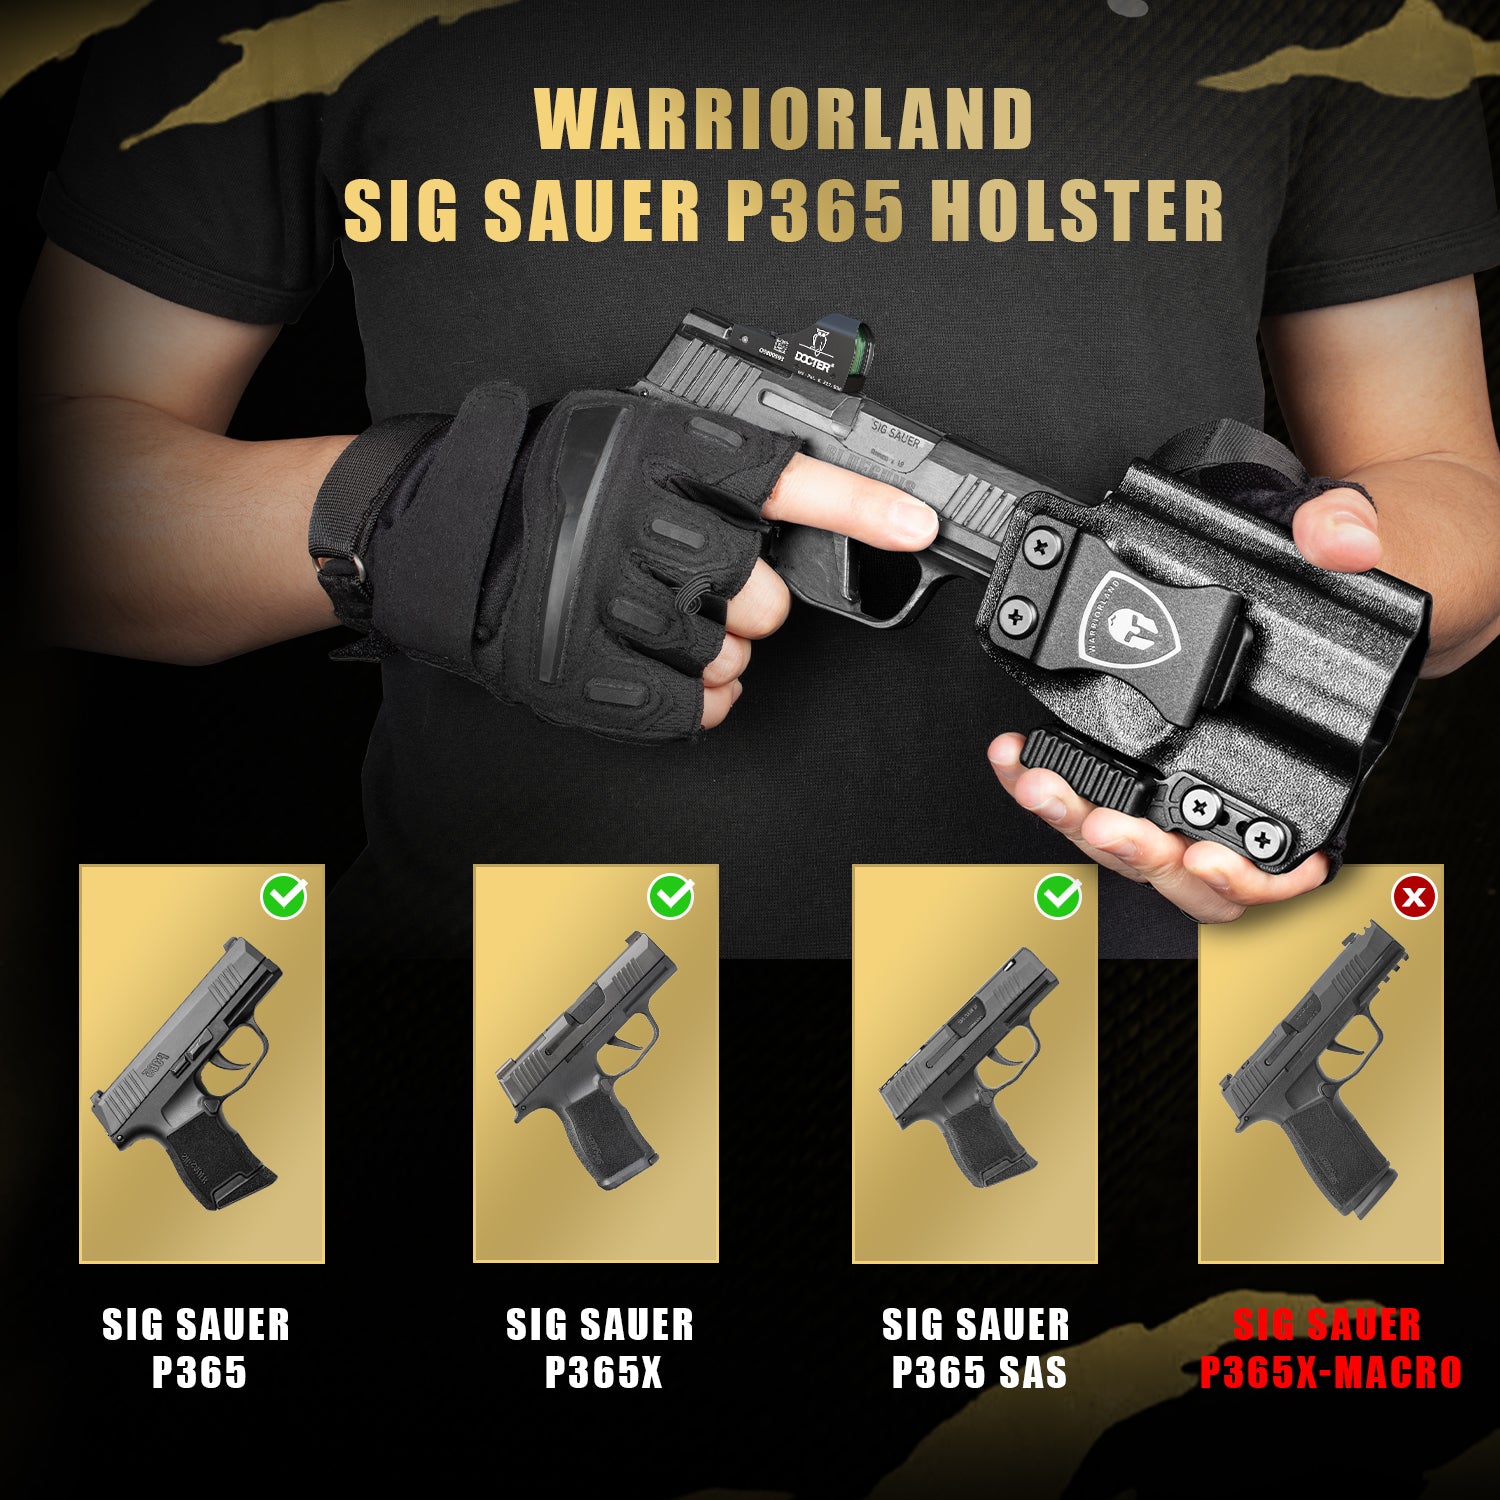 Sig P365 IWB Kydex Holster with Claw Attachment and Optic Cut: Sig Sauer P365 / P365X / P365 SAS, Inside Waistband Appendix Carry P365 Holster, Adj. Cant & Retention, Right Hand|WARRIORLAND